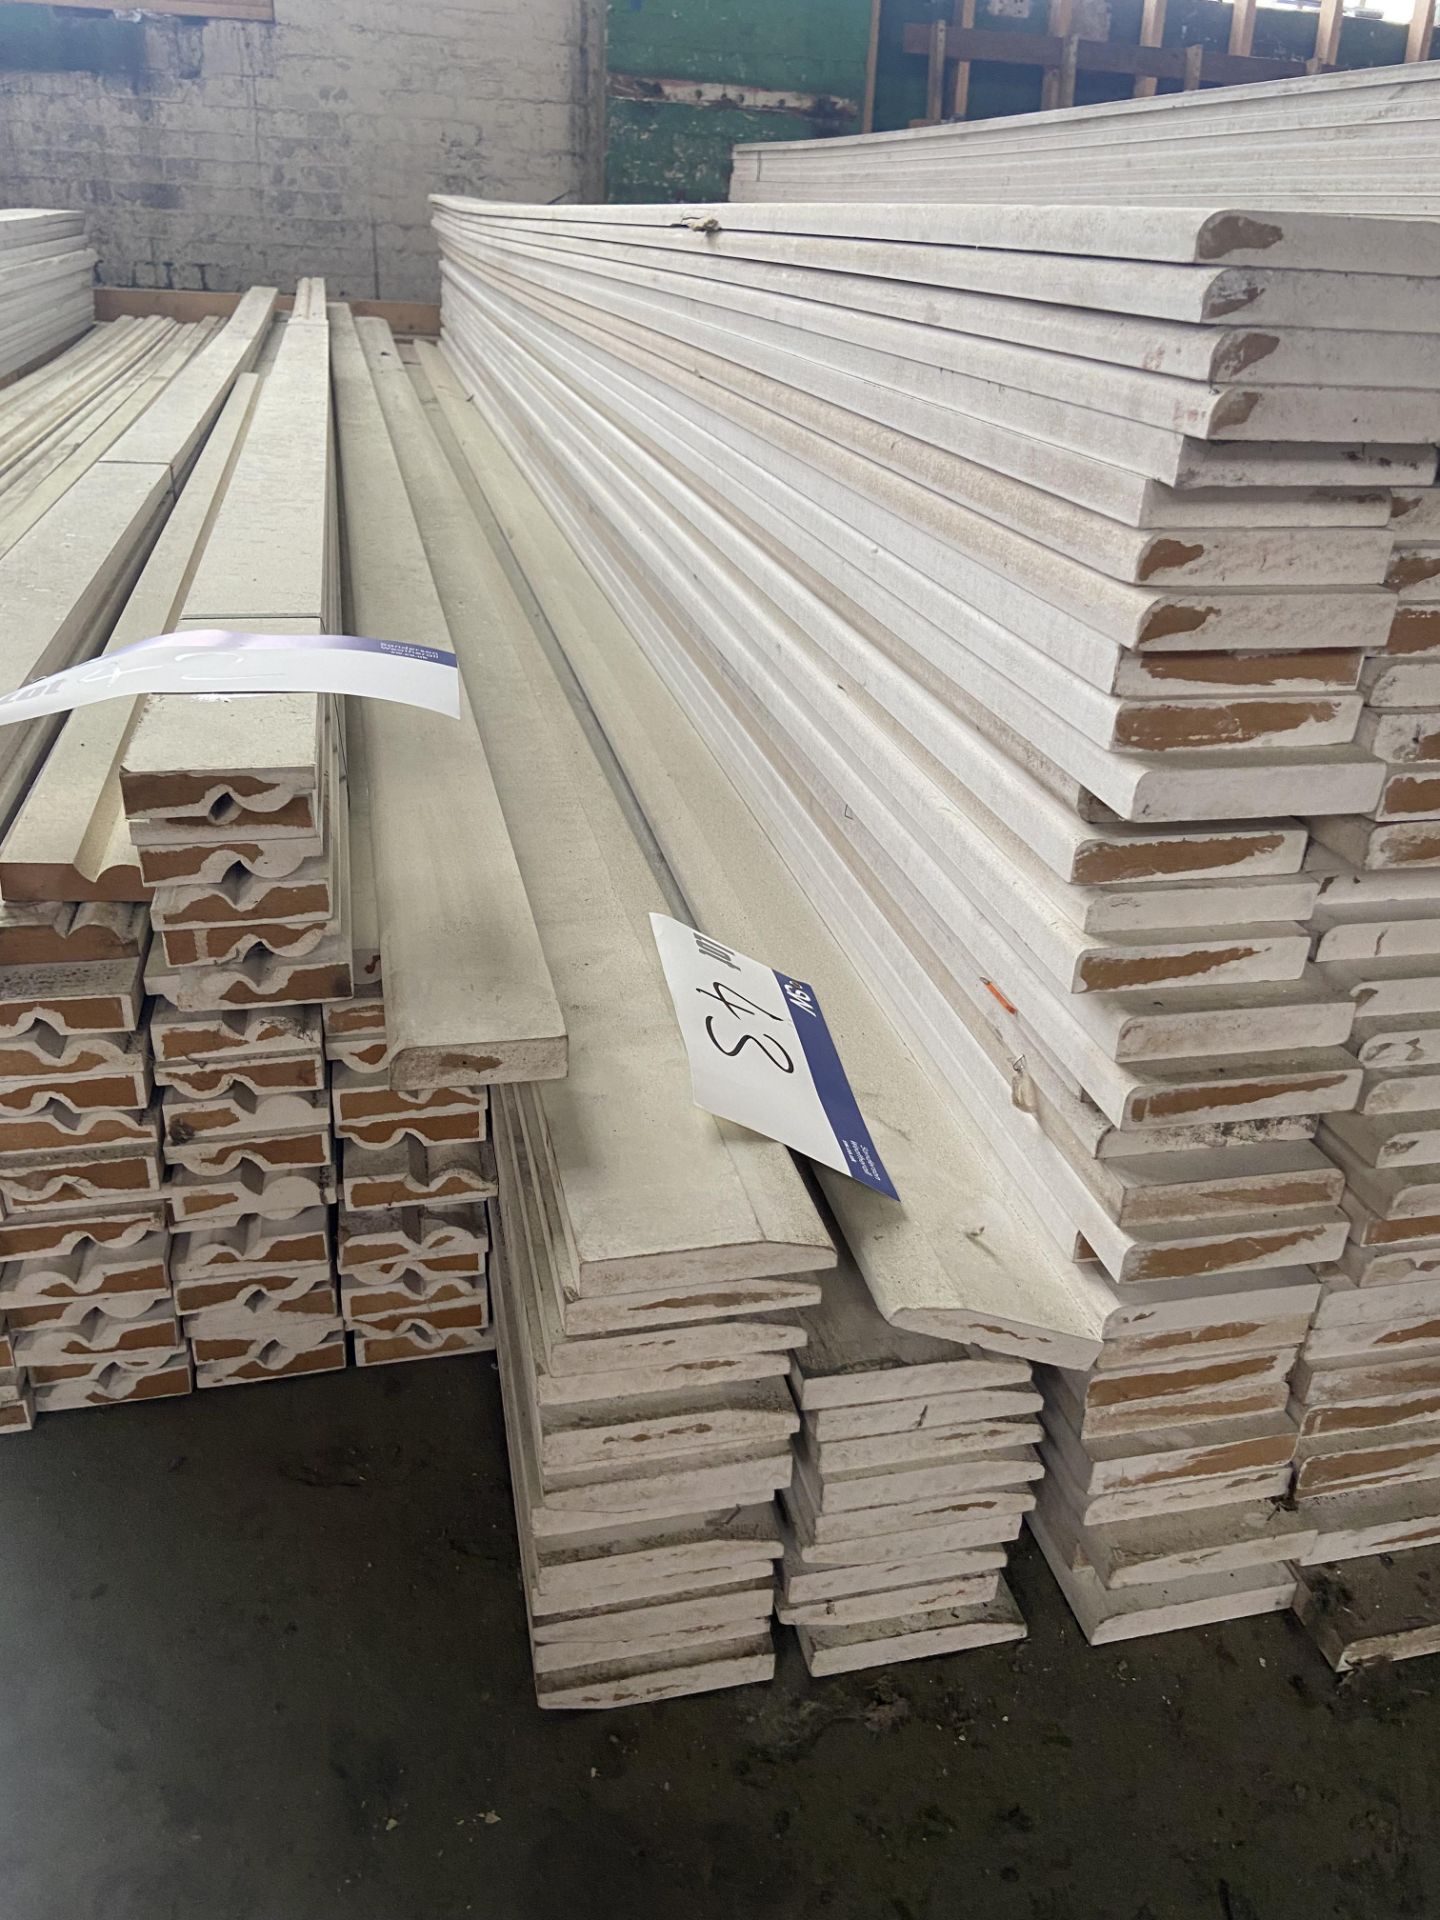 Approx. 23 Lengths of MDF Primed Skirting Boards, each approx. 95mm x 18mm x 4.2m long, as set out